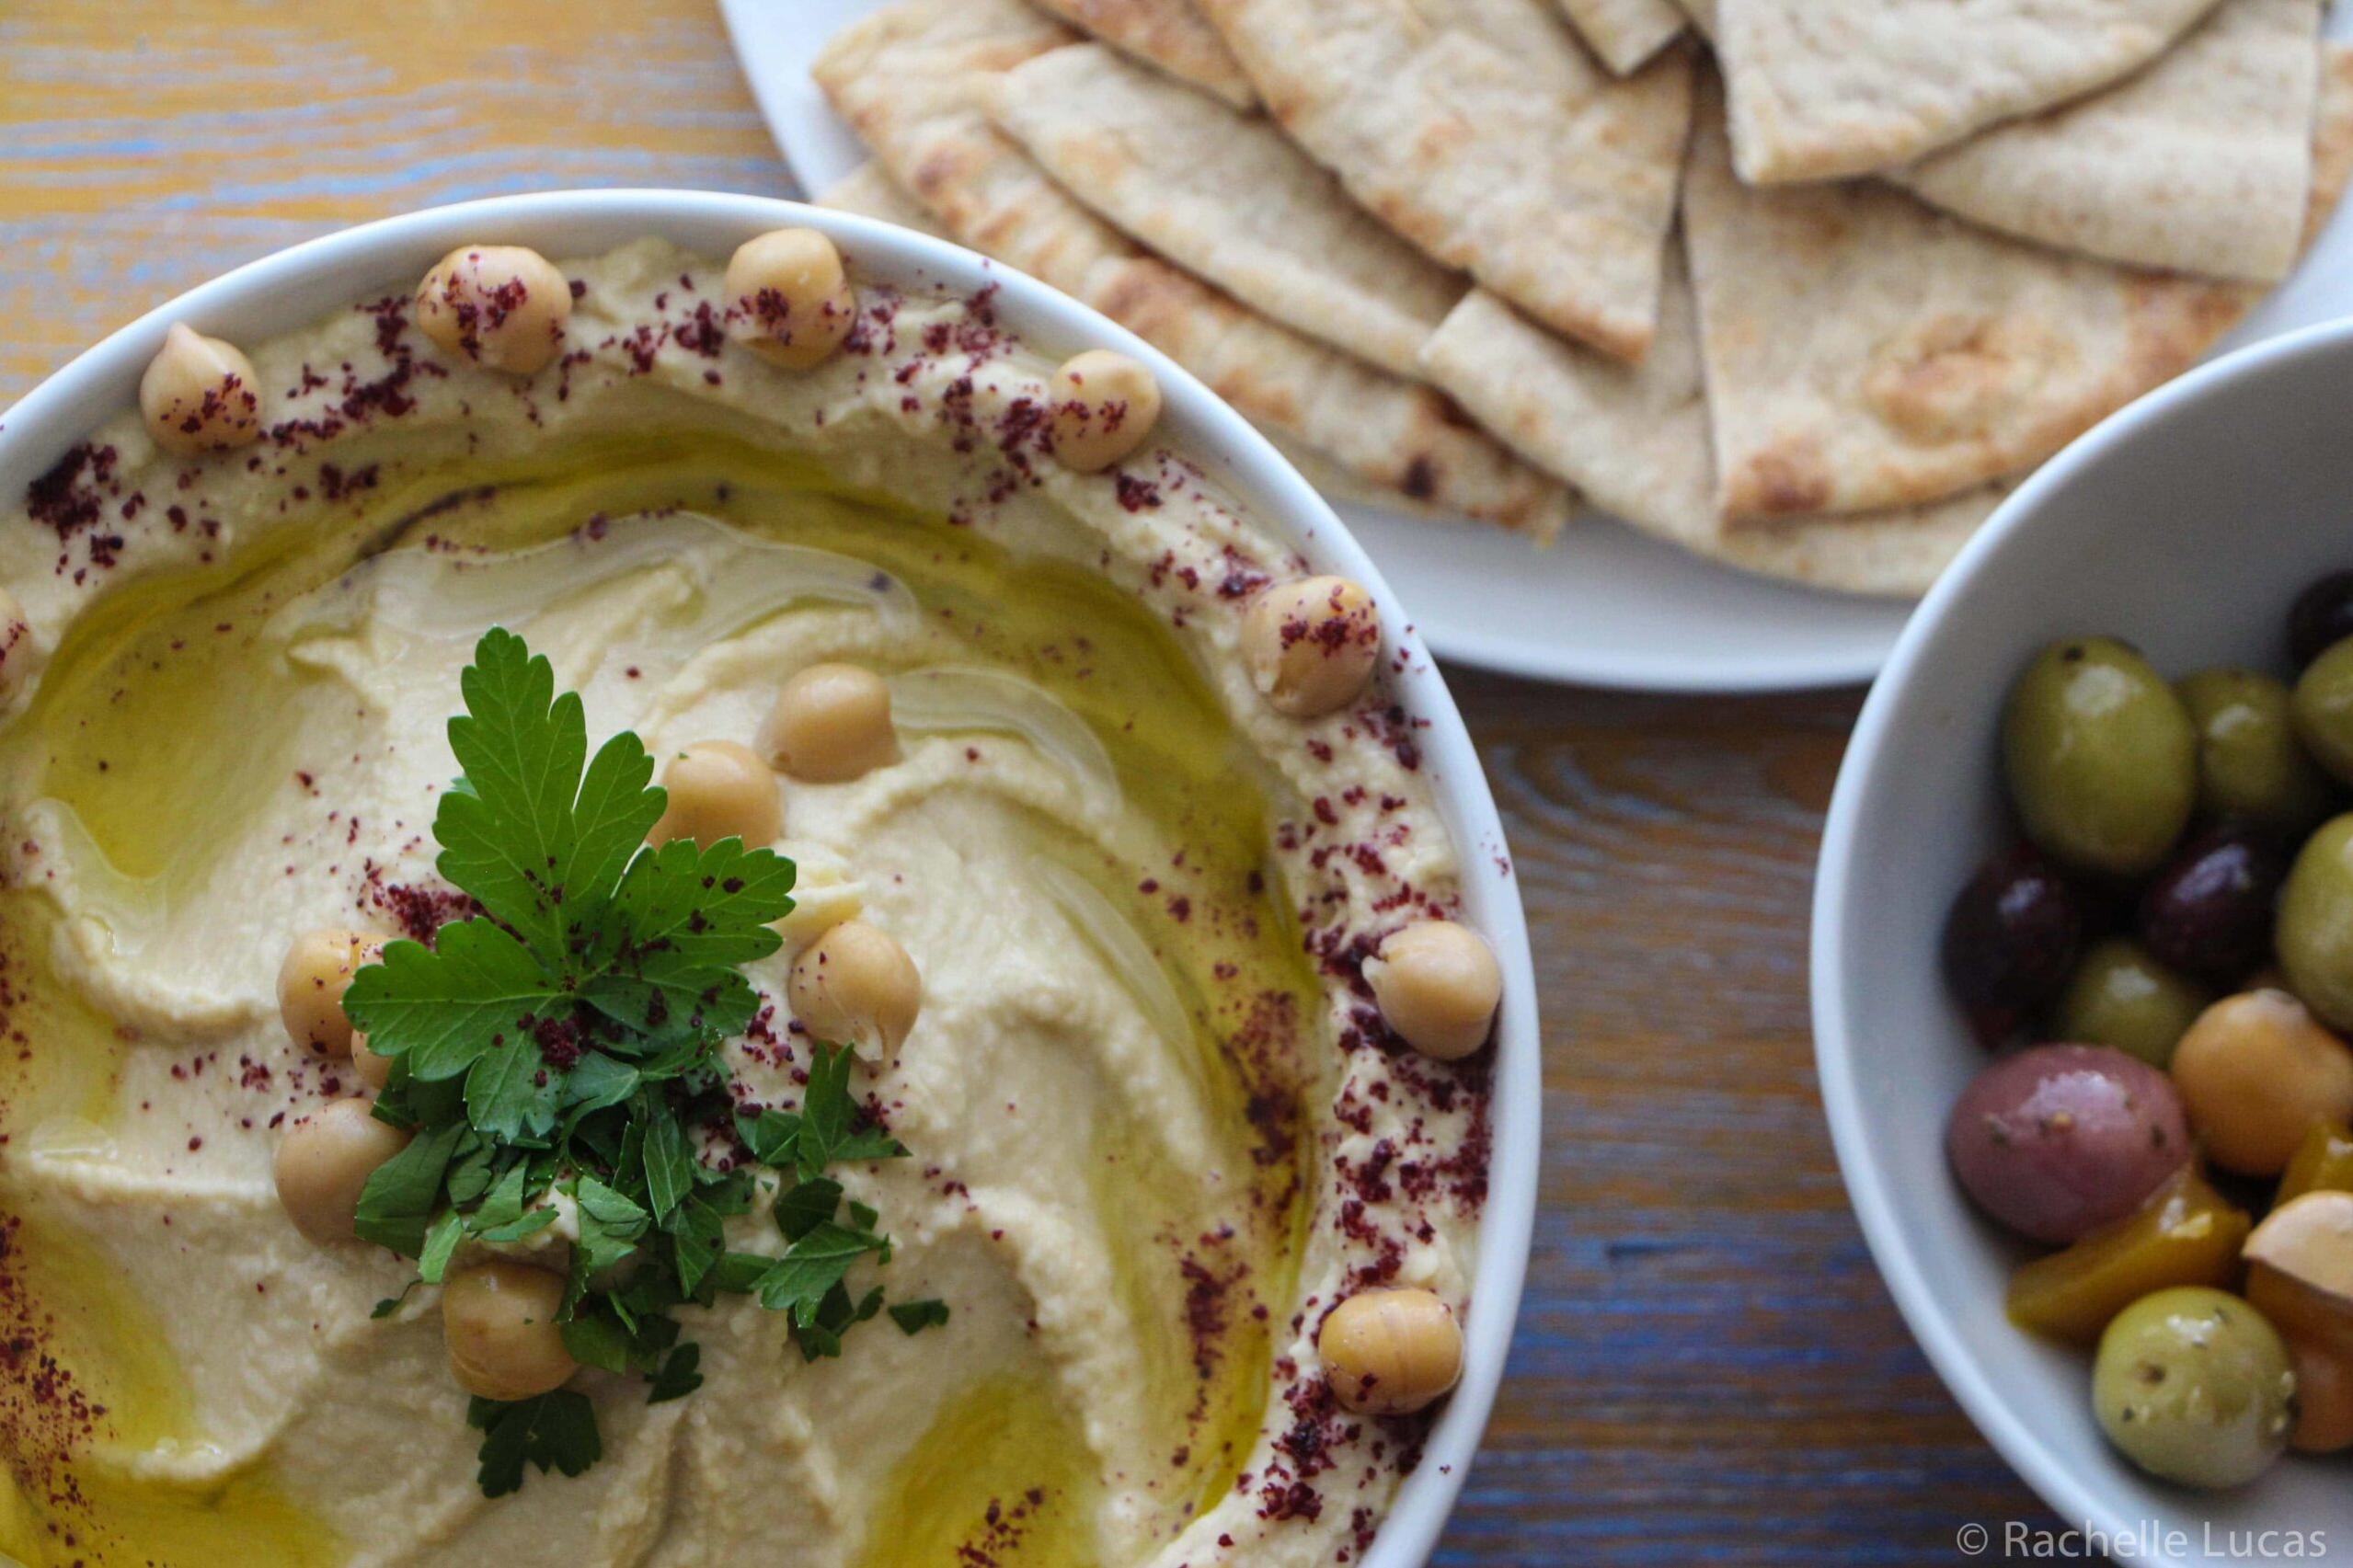  A deliciously flavorful hummus from Jordan.